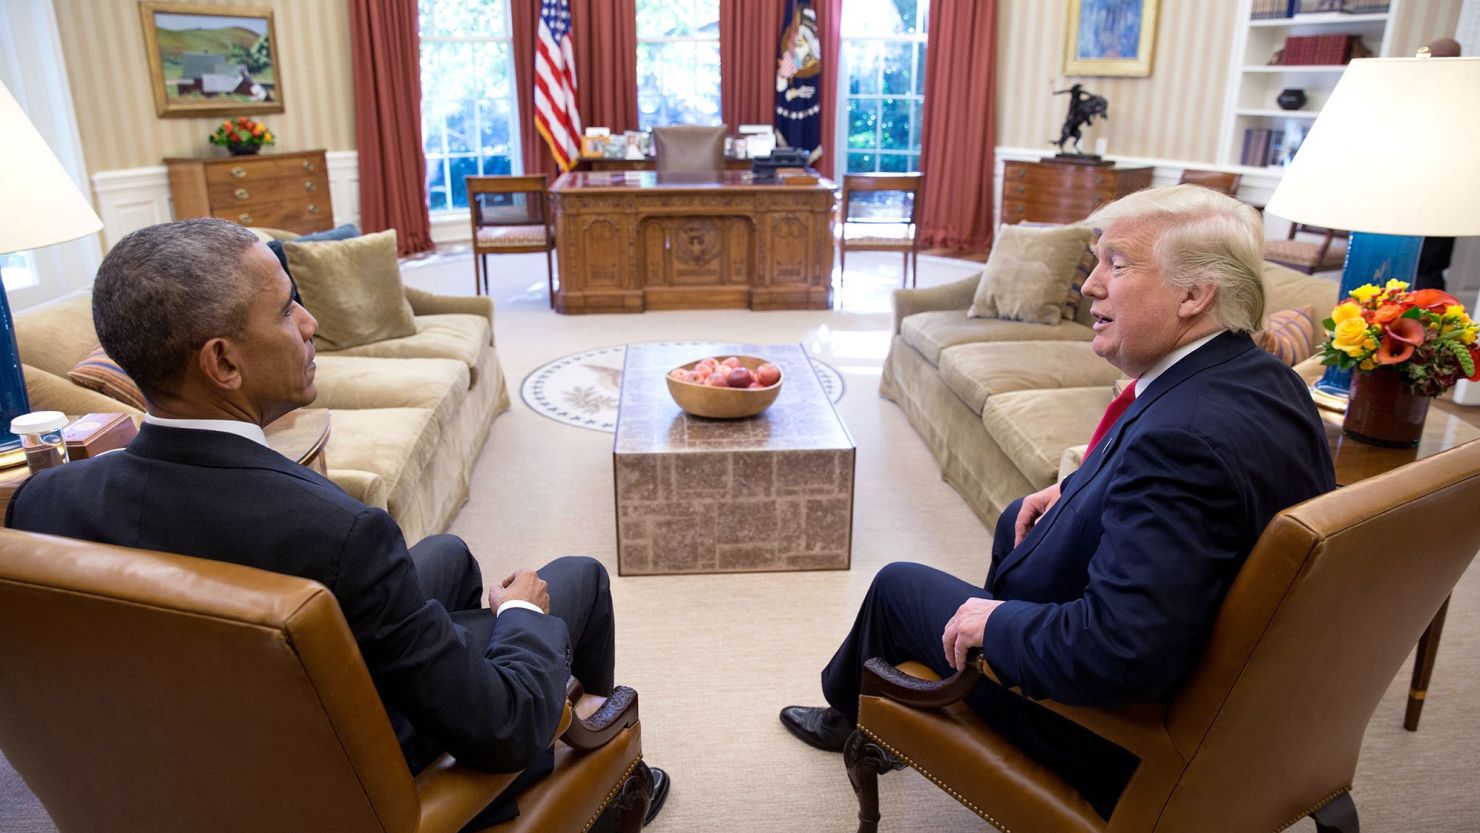 "Two days after the election, the President meets with President-elect Donald Trump." (Official White House Photo by Pete Souza)